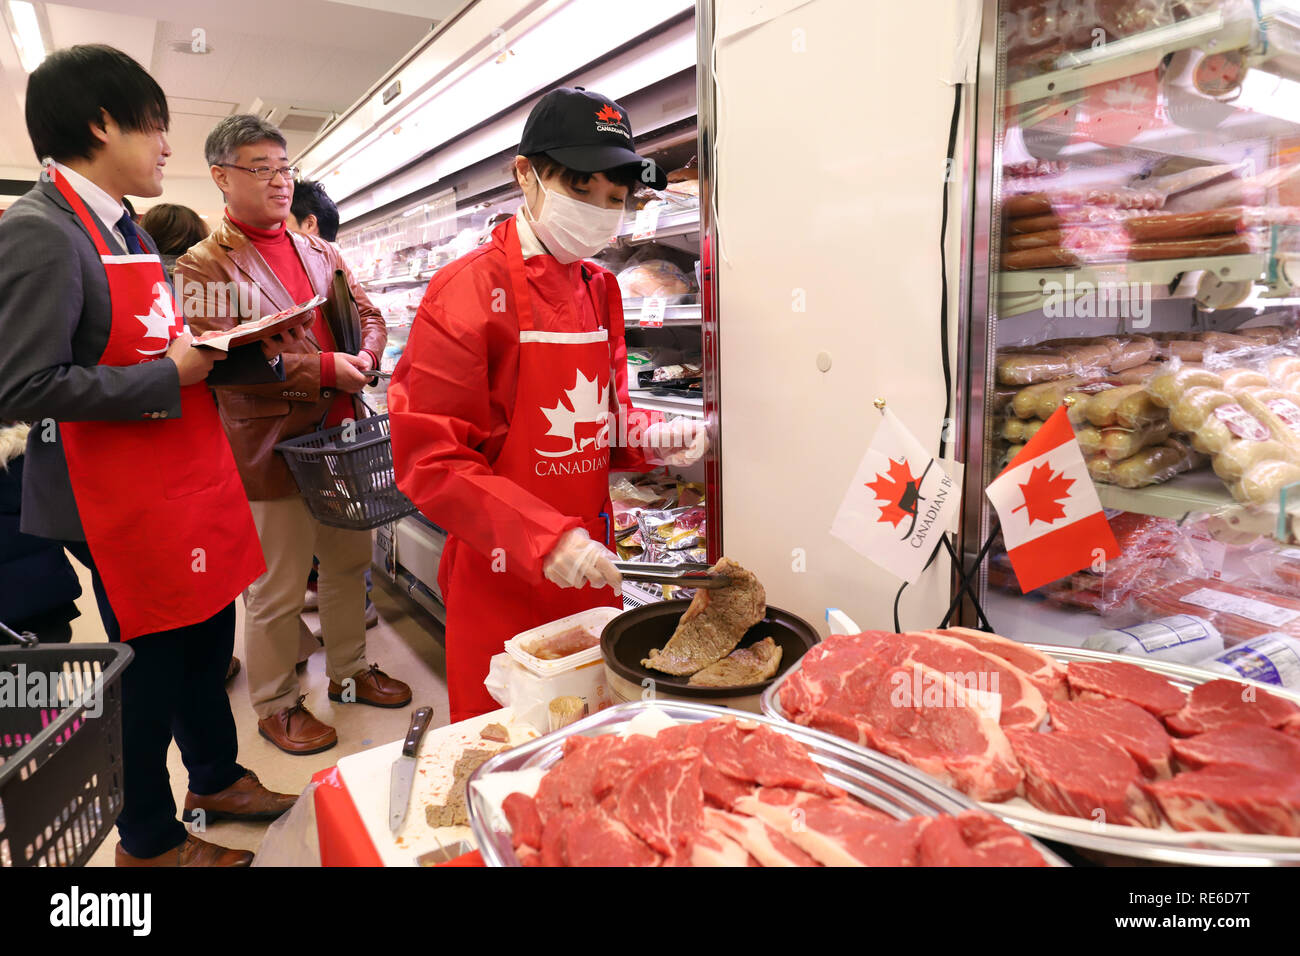 Tokyo, Japan. 20th Jan, 2019. A woman grills a slice of Canadian beef for tasting at a sales promotional event for Canadian beef as Japan's tariff of imported beef will be reduced from 38.5 percent to 9 percent in 16 years at the Nissin World Delicatessen supermarket in Tokyo on Sunday, January 20, 2019. Canadian International Trade Minister James Carr is now here to attend the first ministerial meeting of the Comprehensive and Progressive Agreement for Trans-Pacific Partnership (CPTPP). Credit: Yoshio Tsunoda/AFLO/Alamy Live News Stock Photo